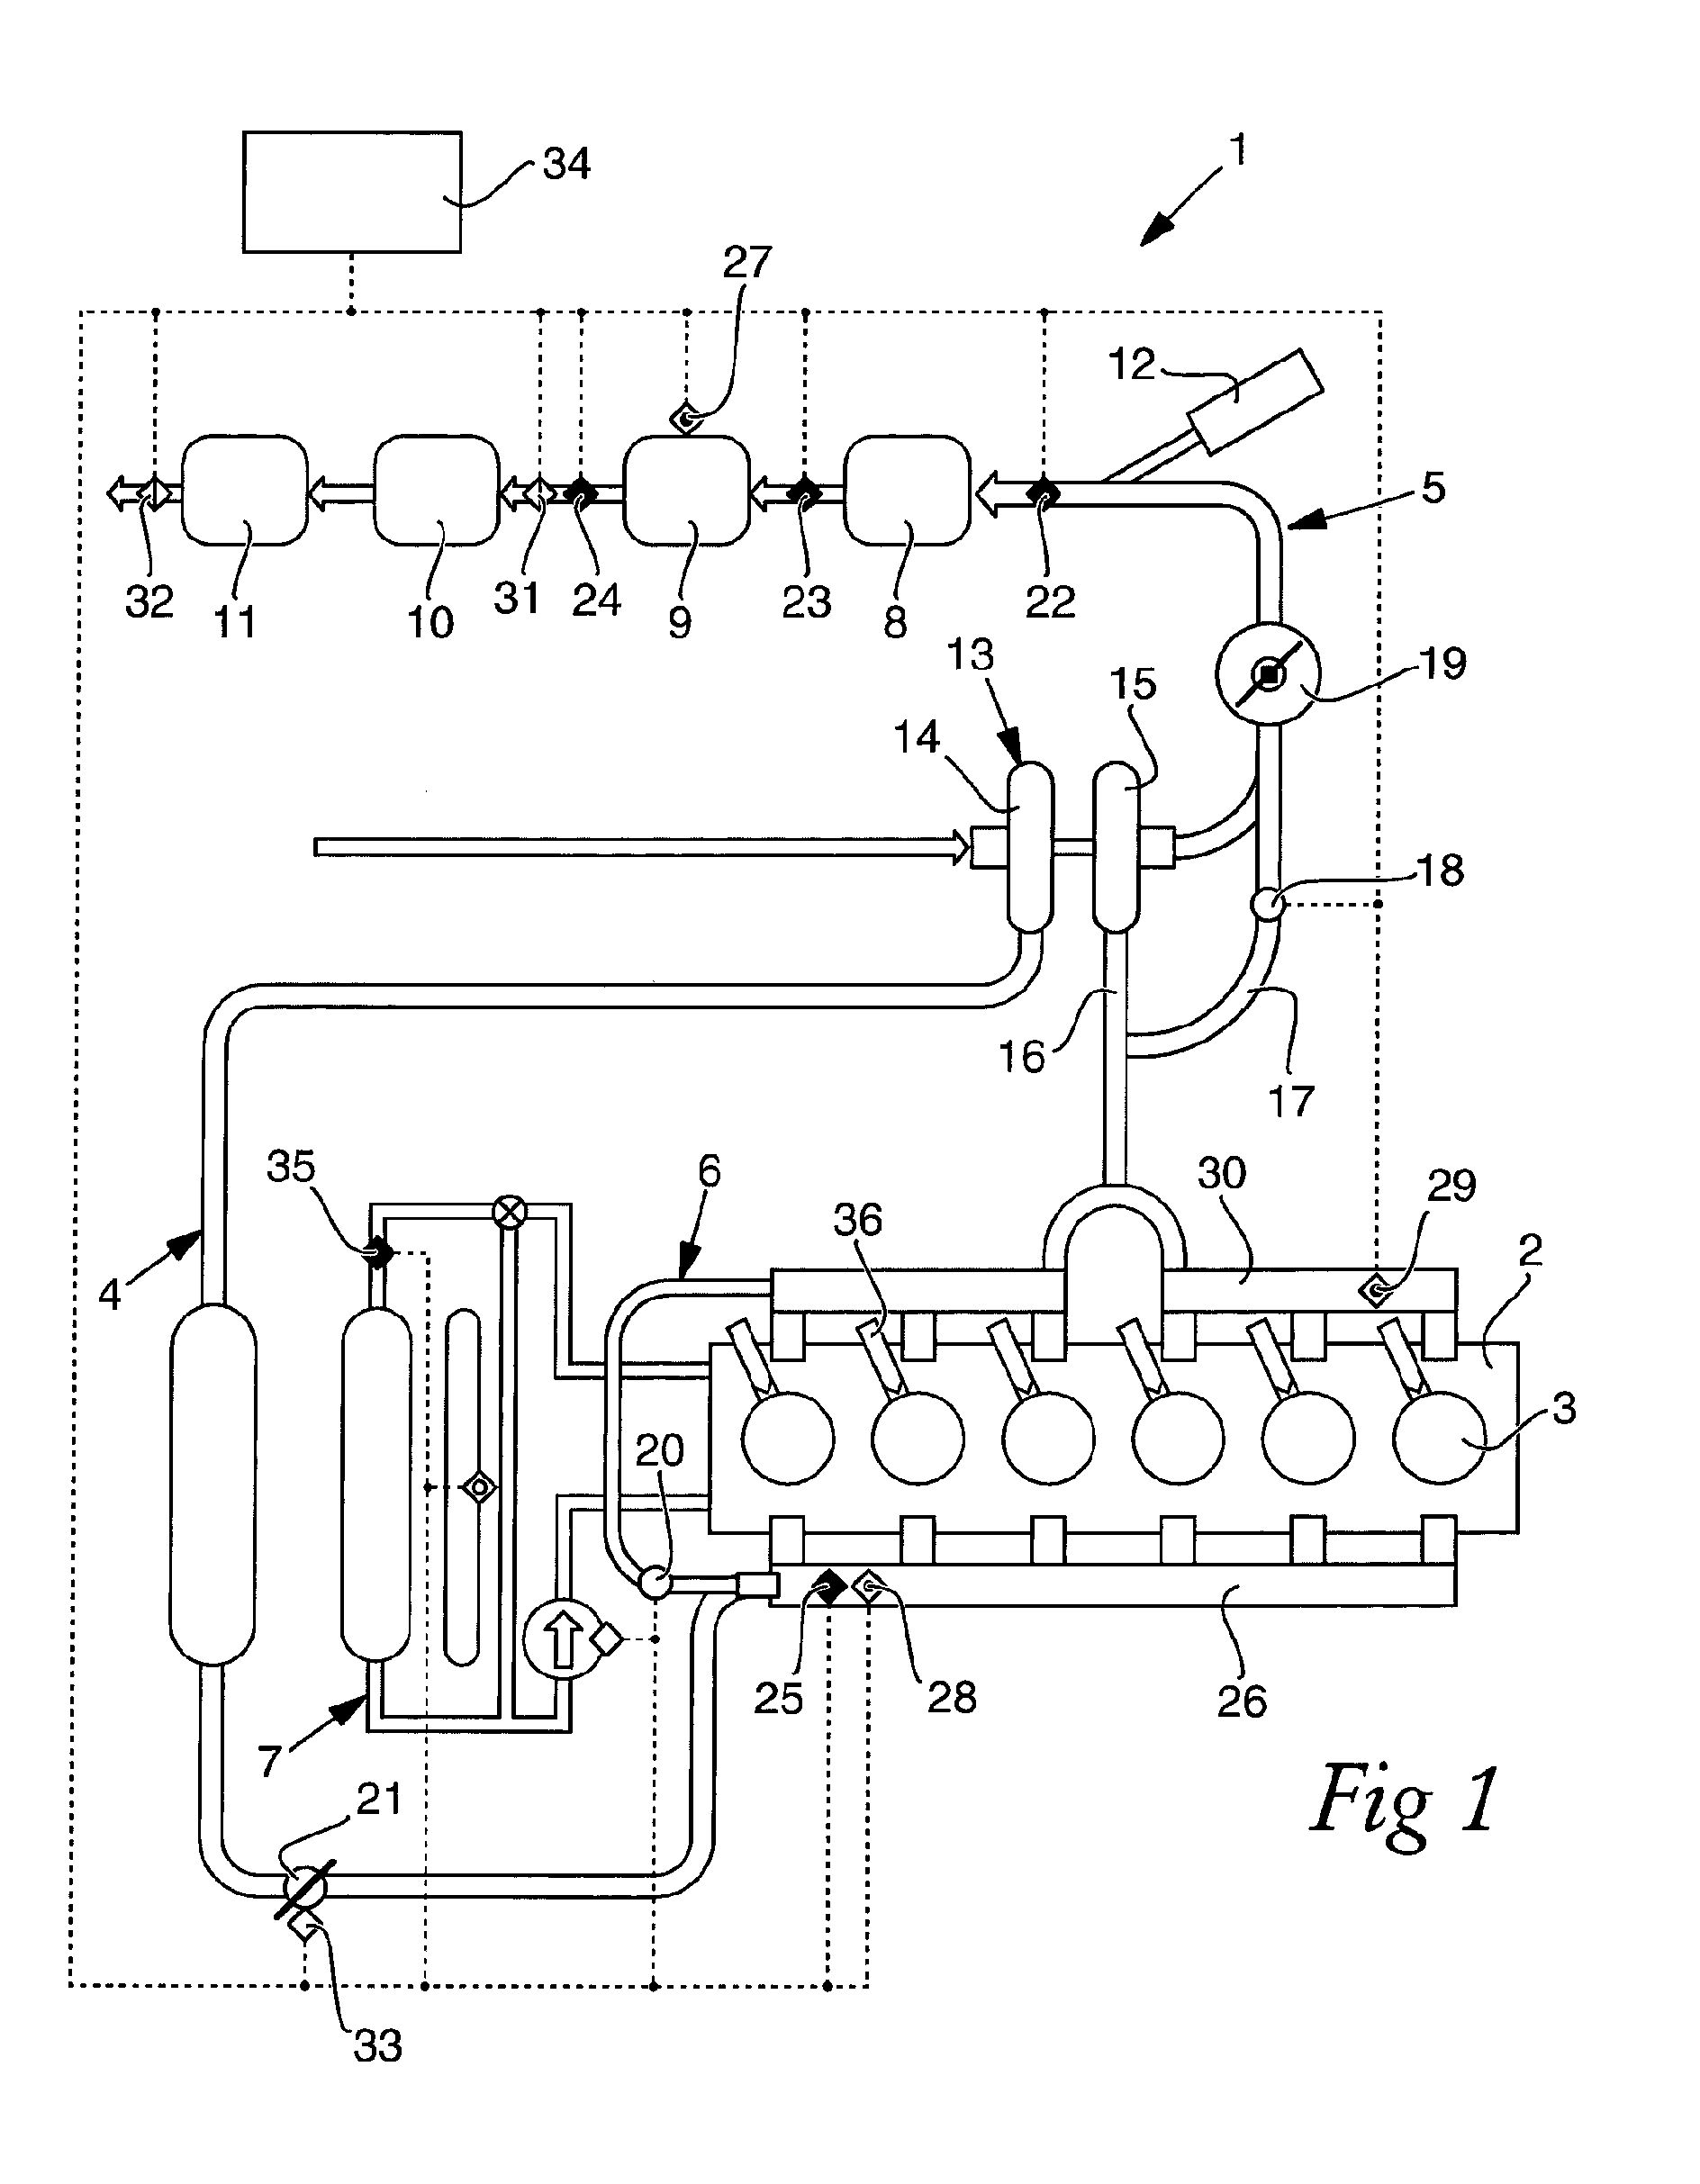 Method of conditioning a particle filter